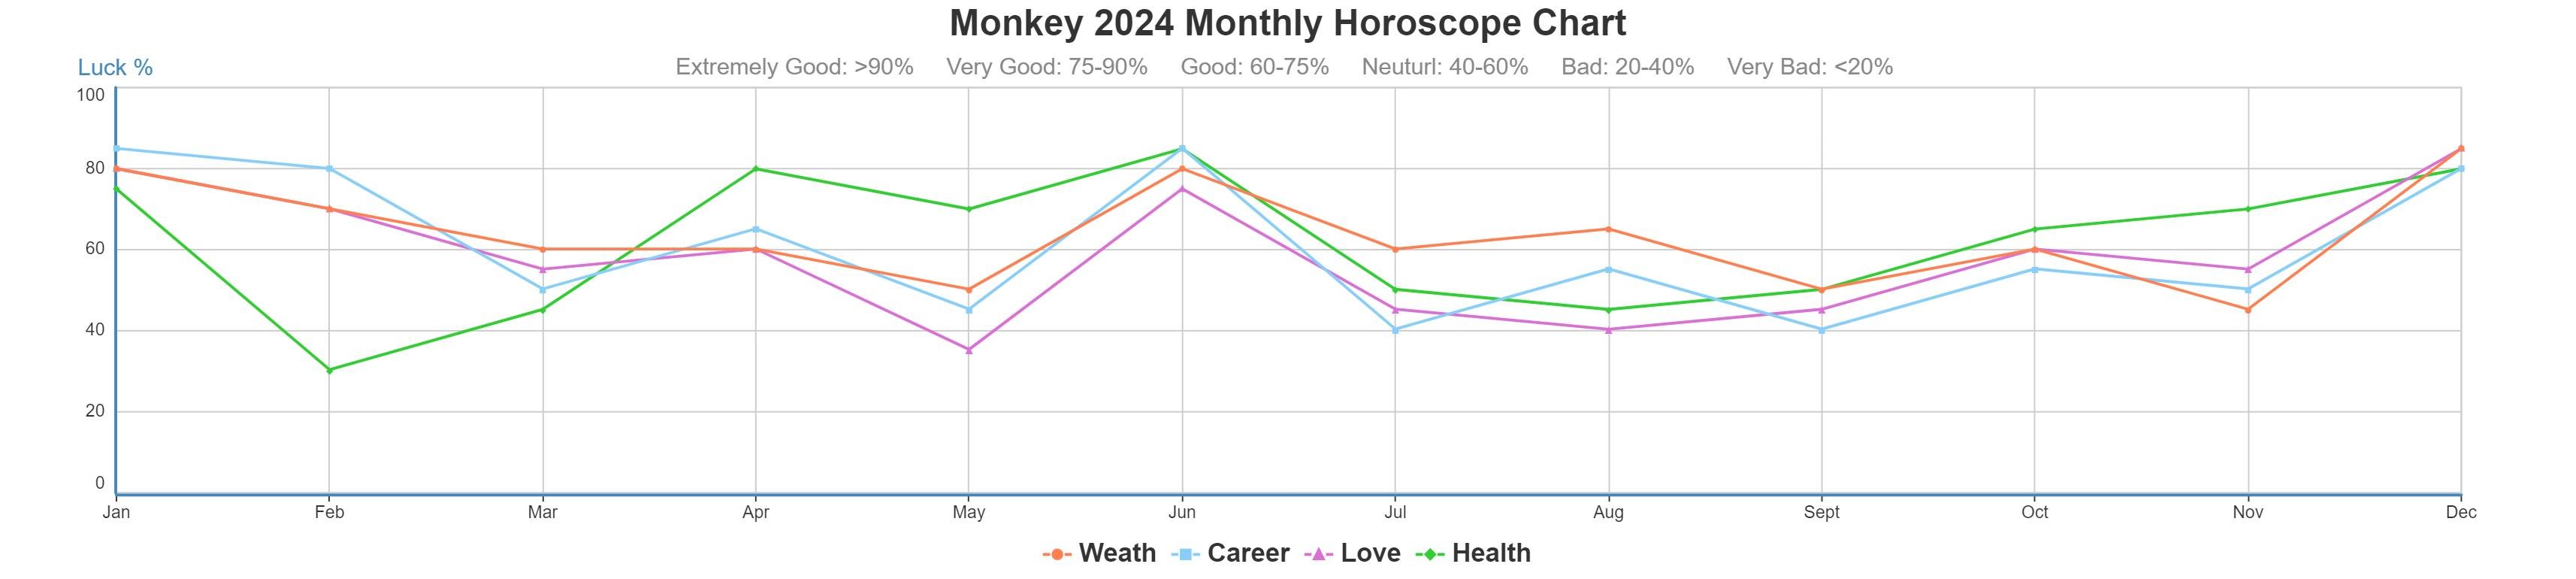 Chinese Horoscope for Monkey, 2023/2024 Yearly and Monthly Predictions